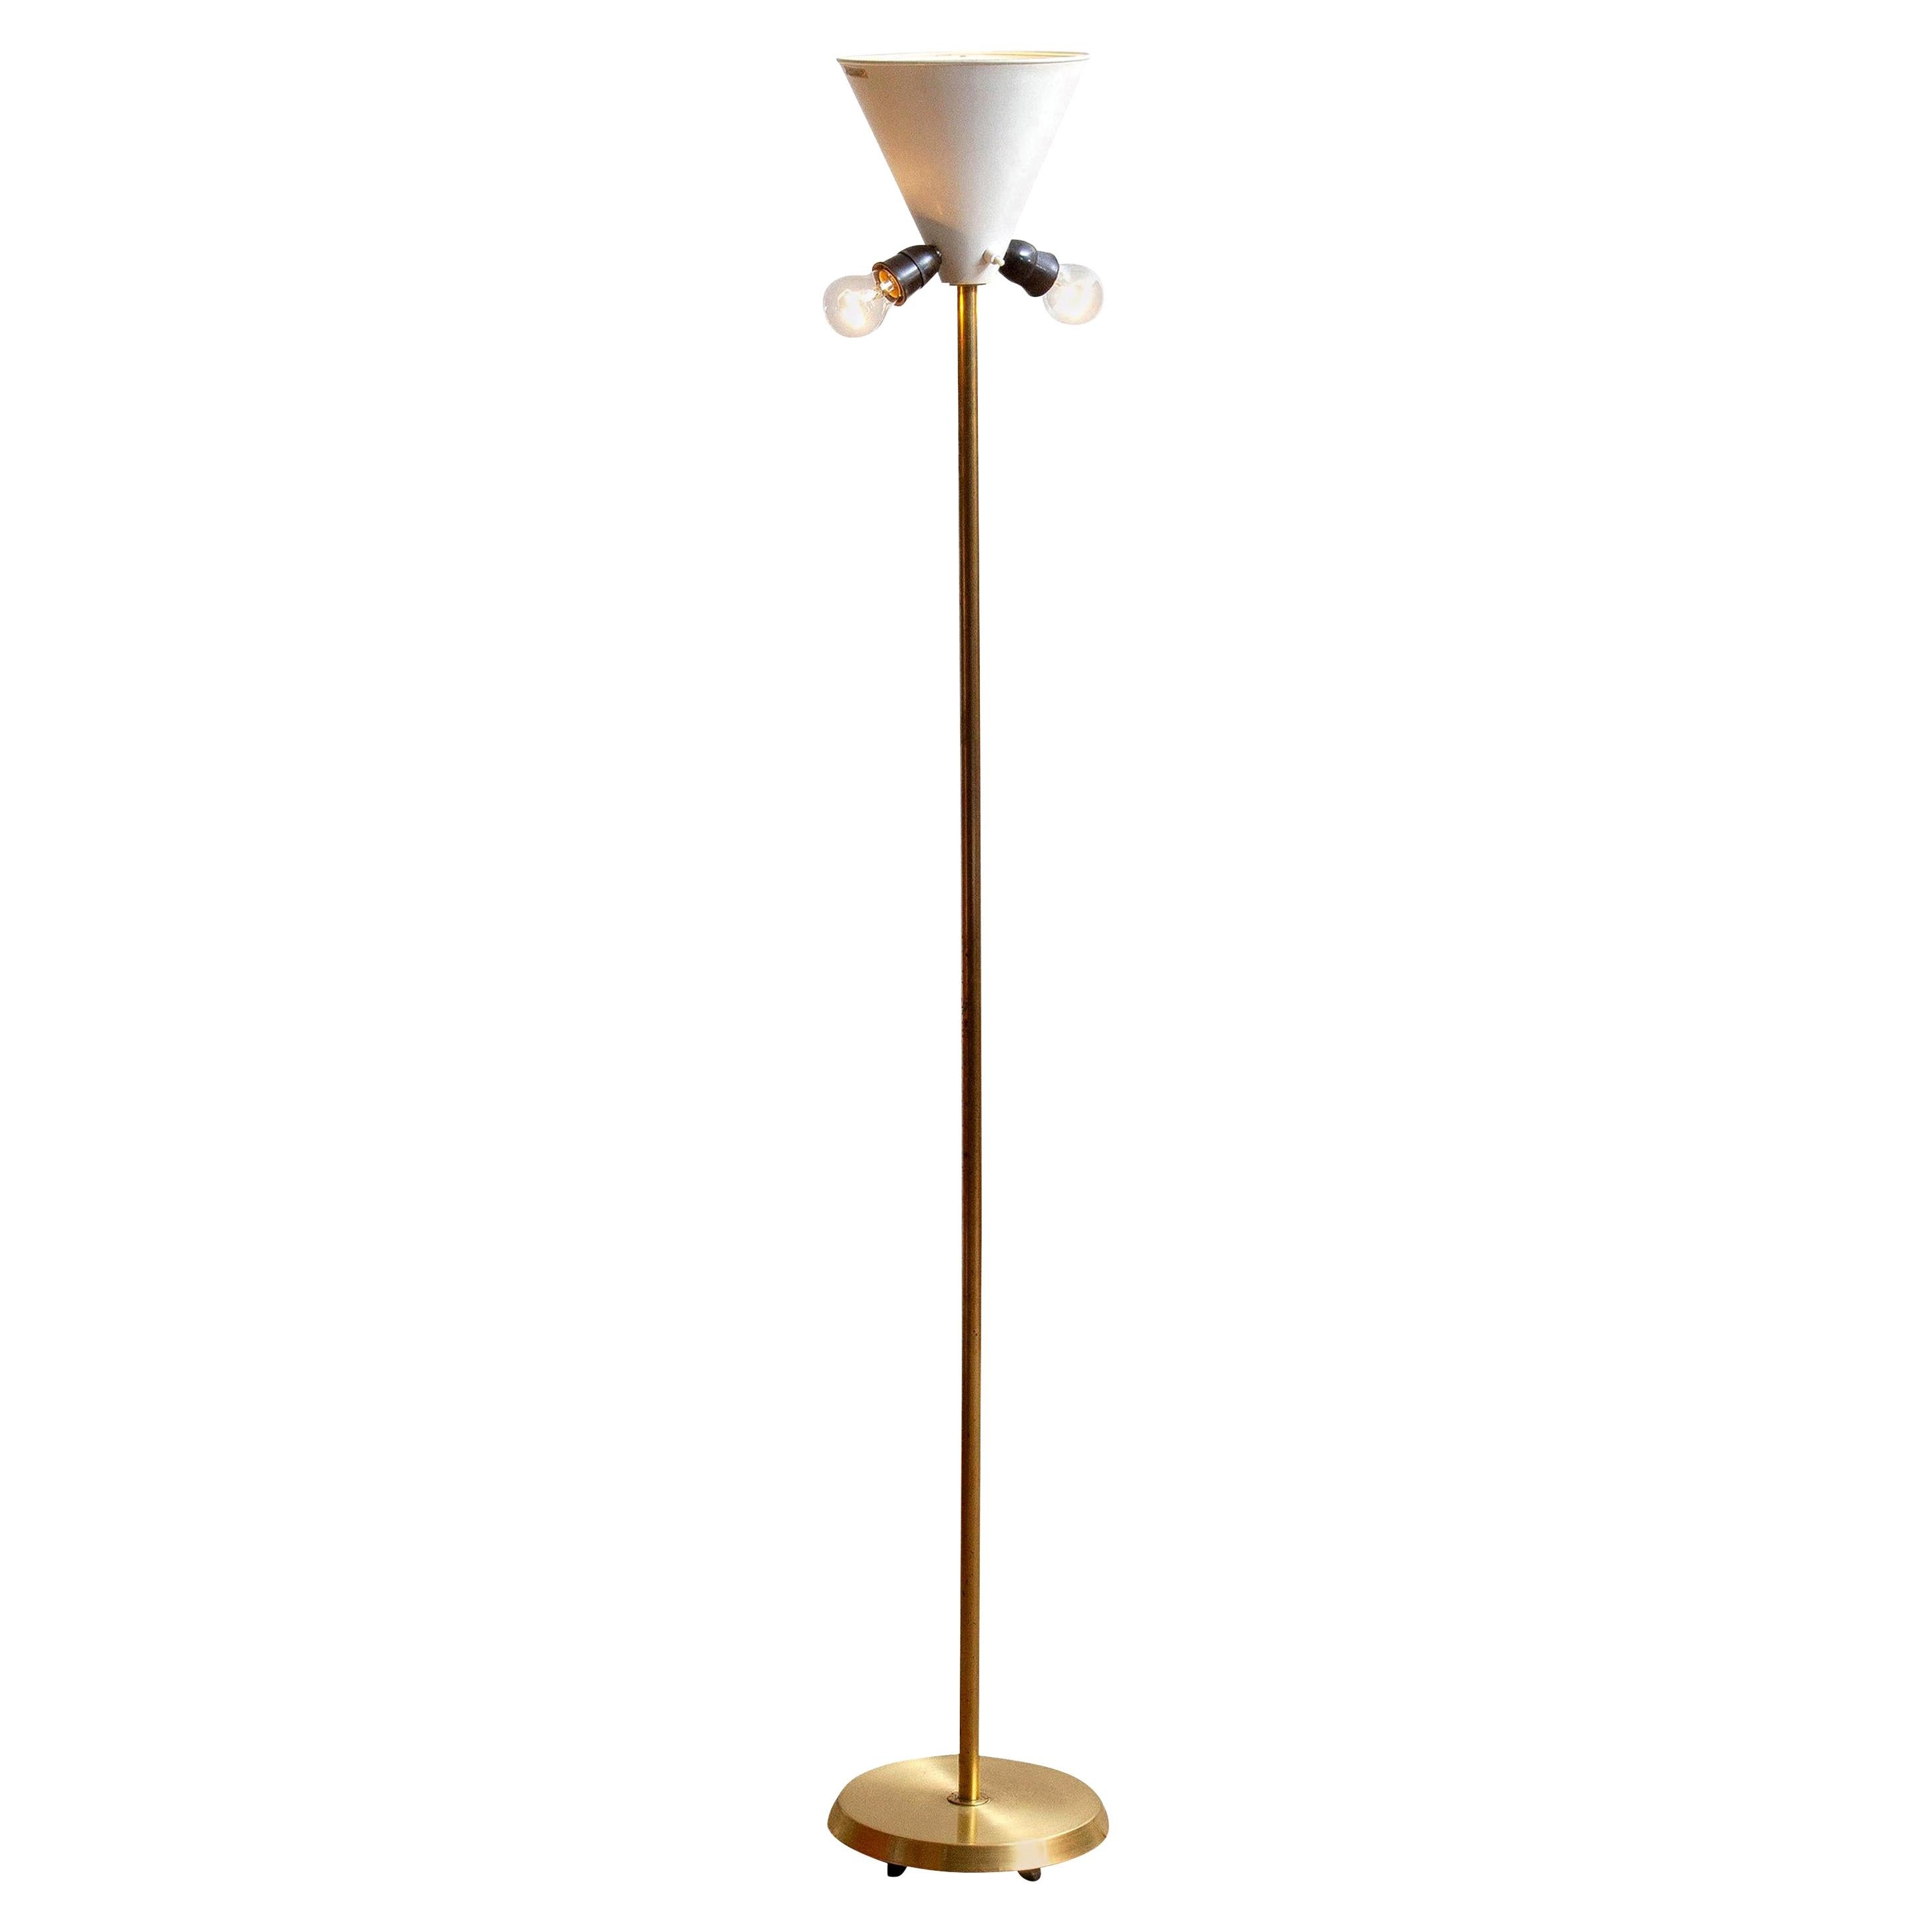 1950s, Up-Light Floor Lamp in Brass and Metal by Fagerhults Belysning, Sweden